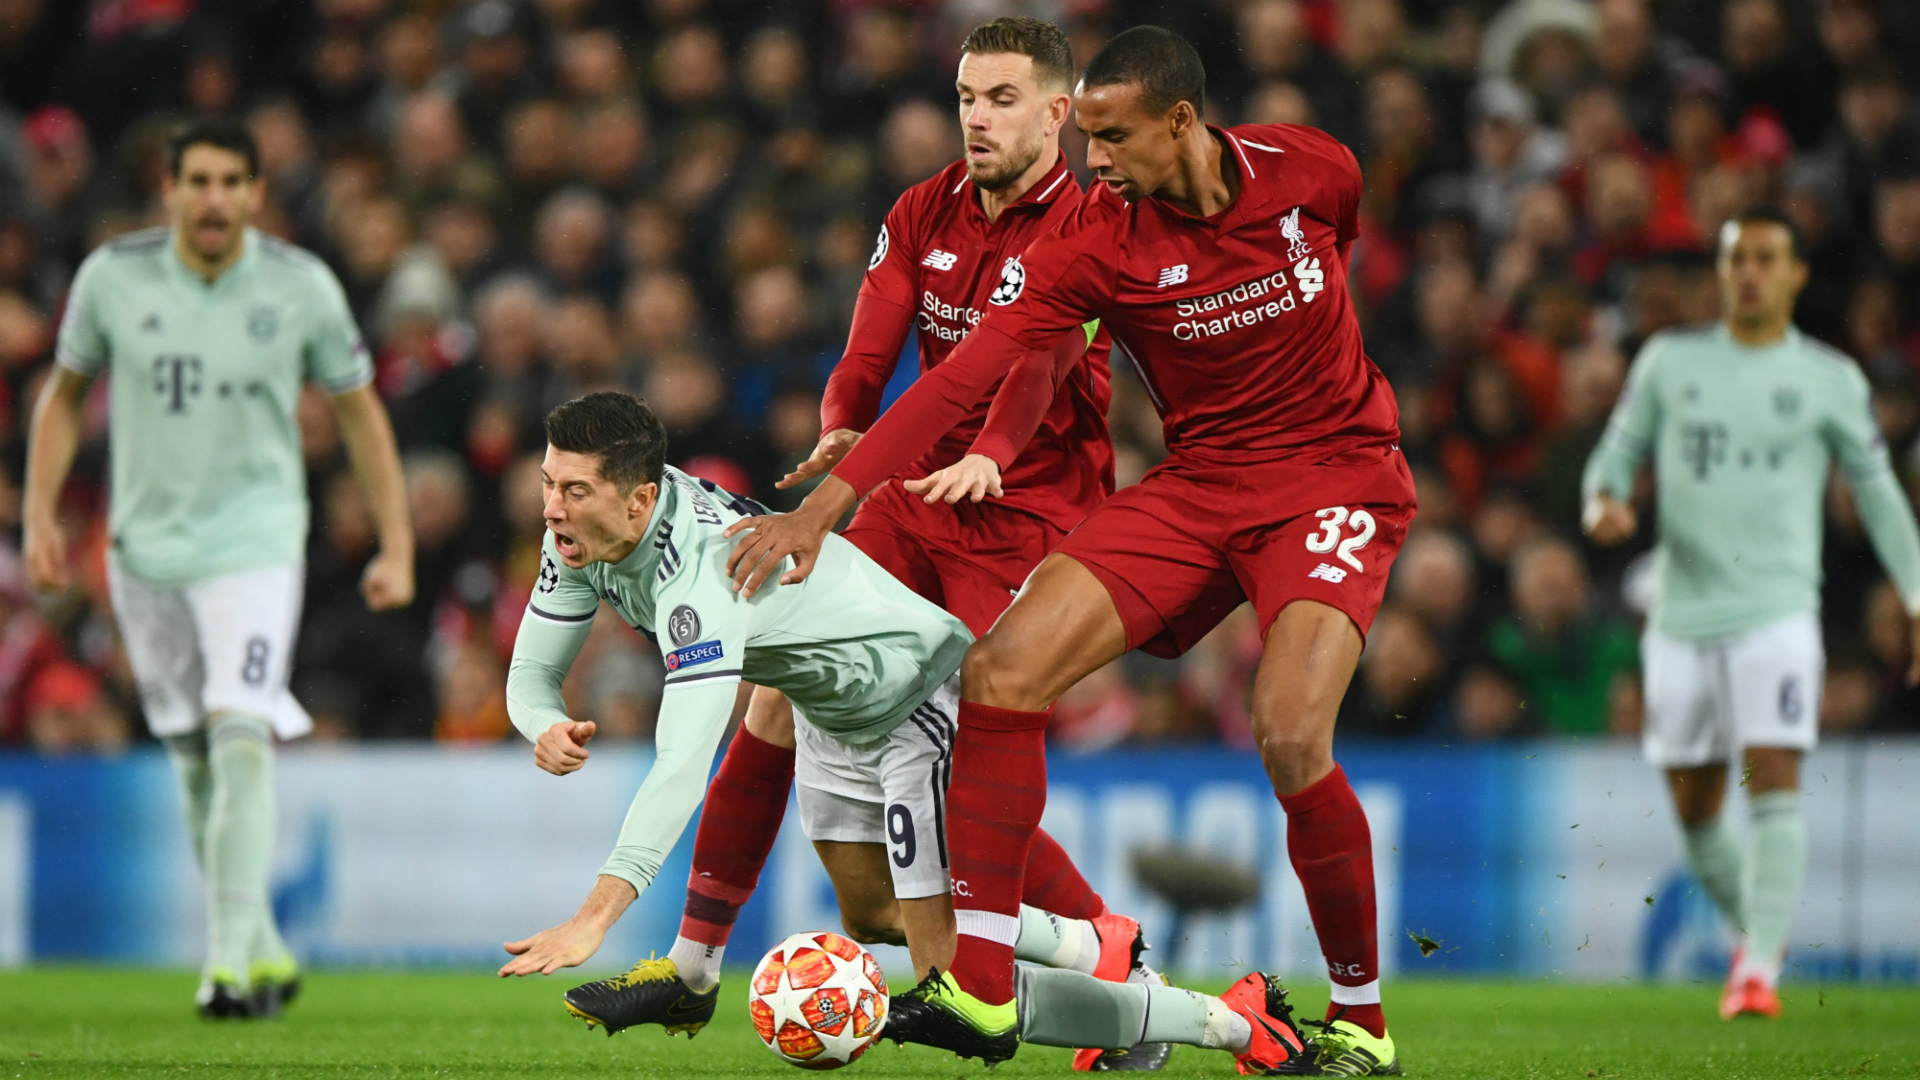 Virgil van Dijk was suspended but Liverpool kept a clean sheet at home to Bayern Munich in the last 16 of the Champions League.